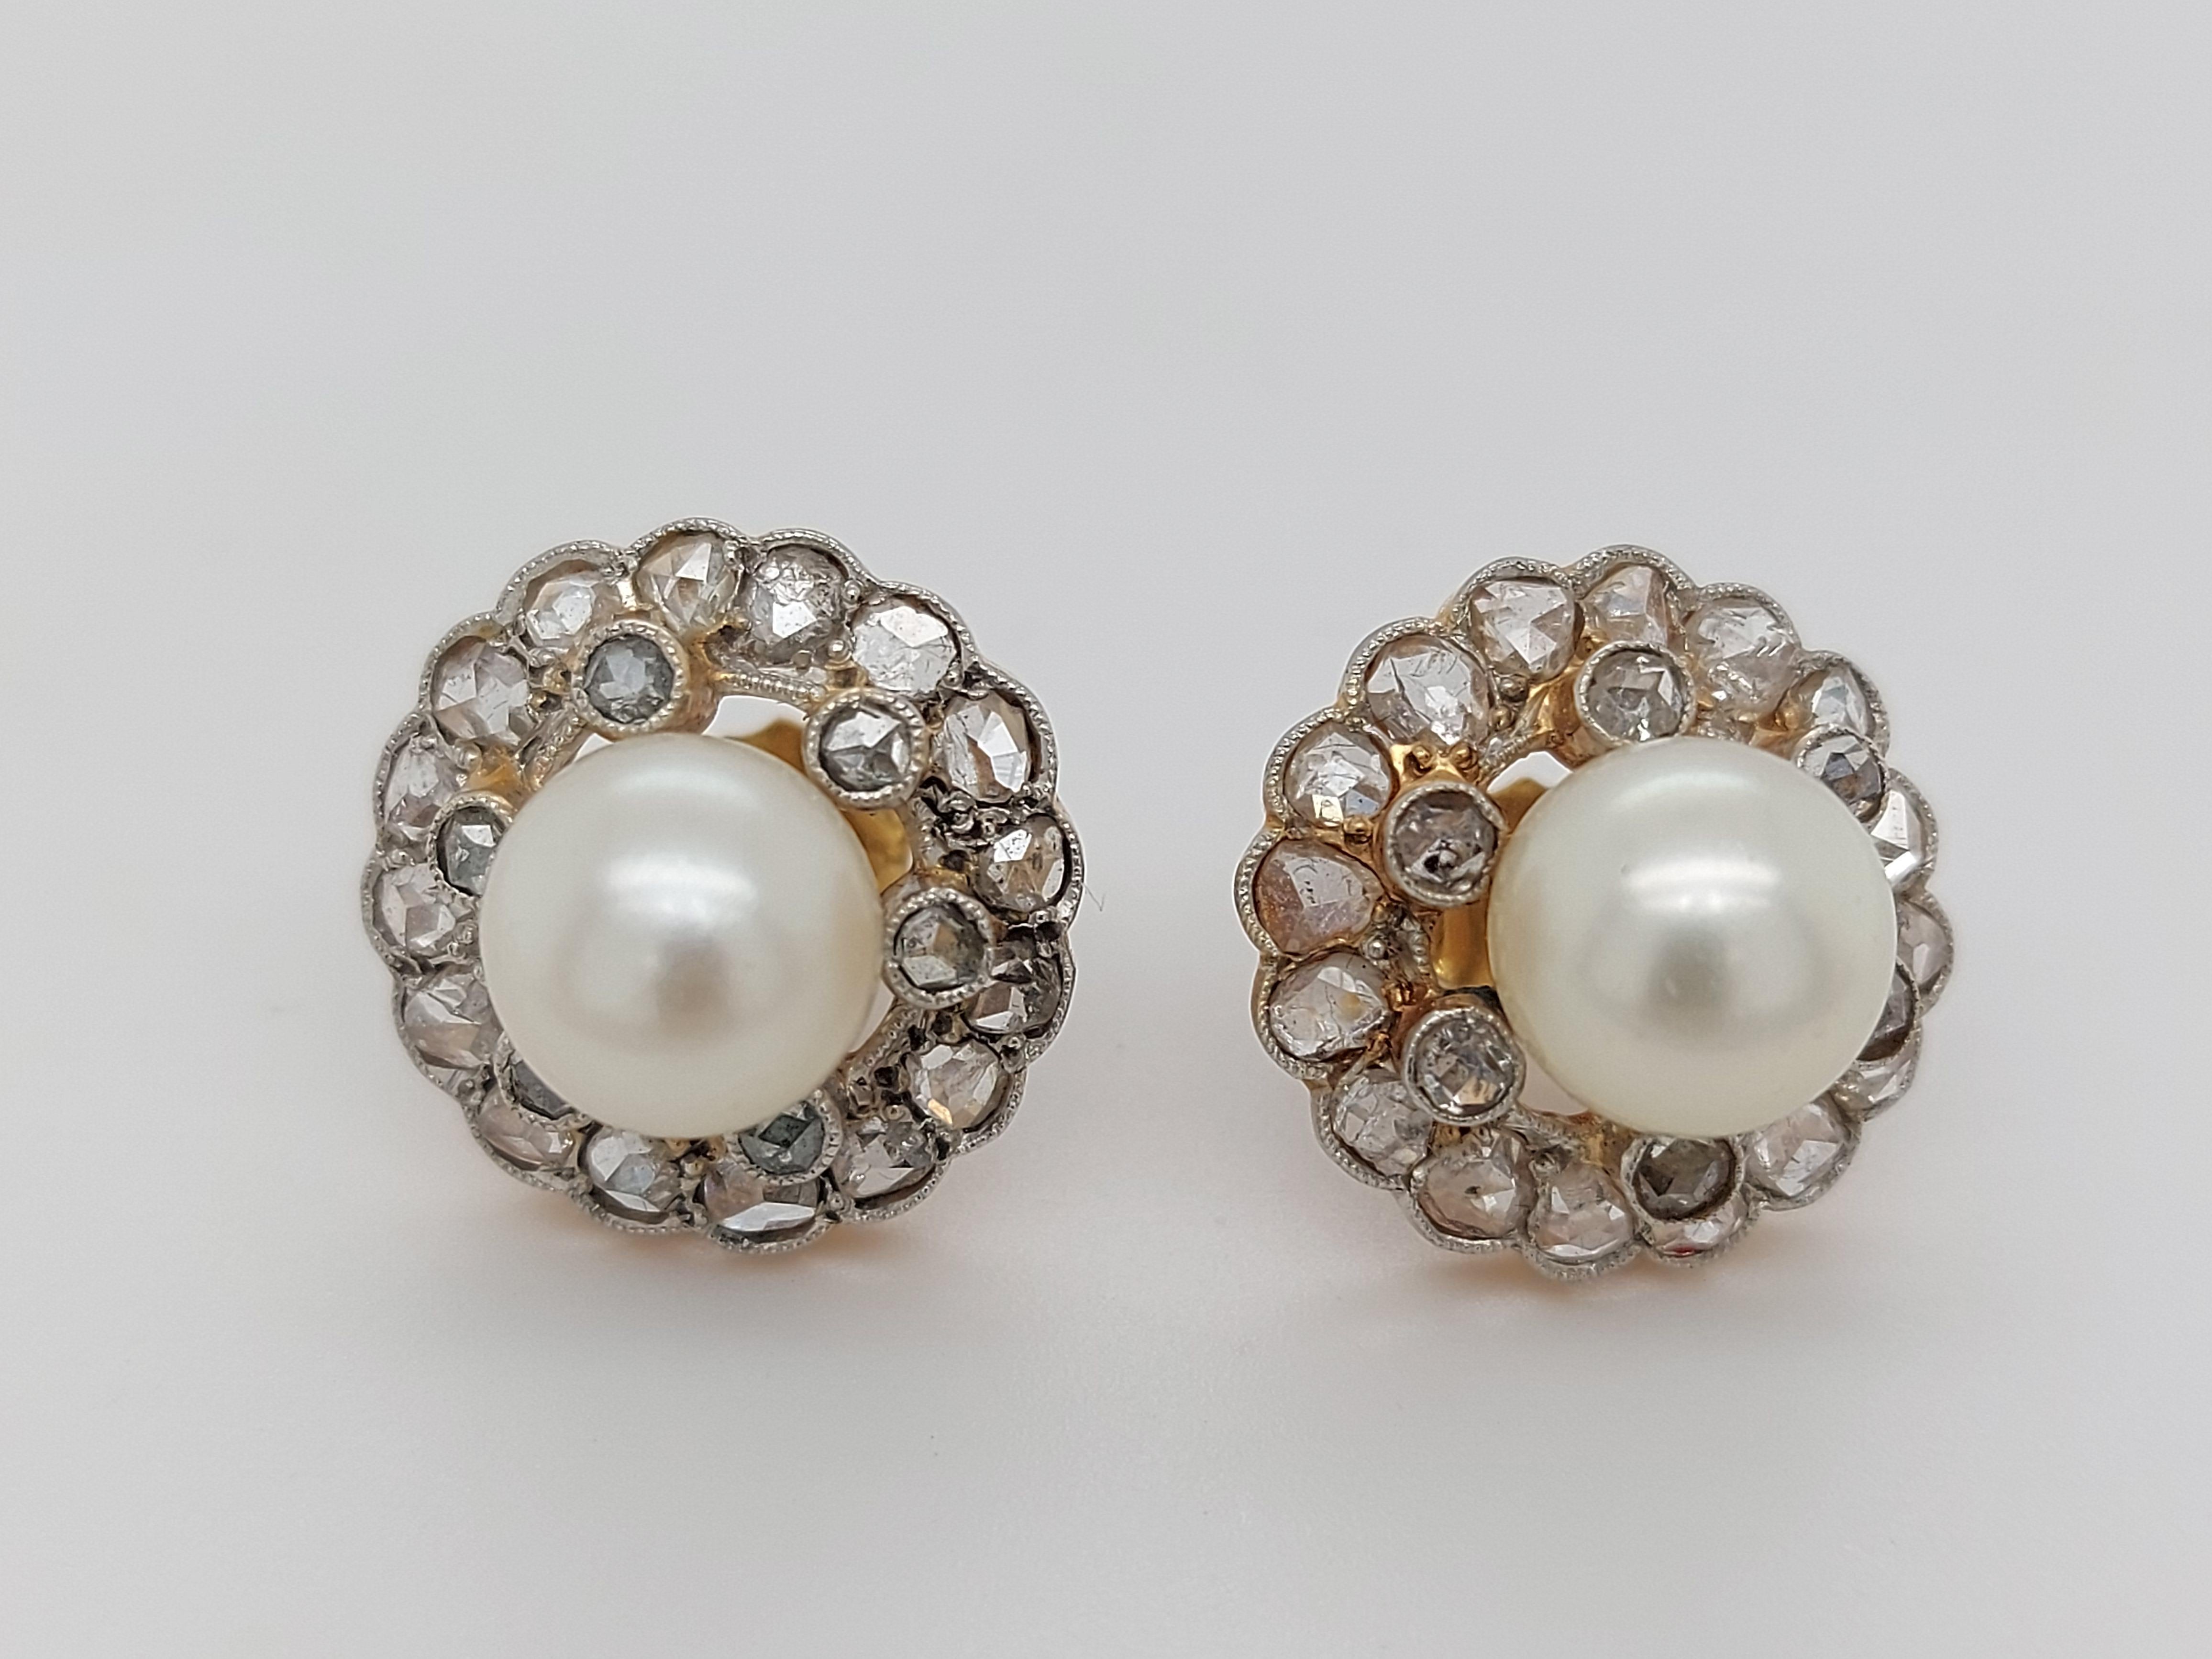 Beautiful Platinum and Gold Ring and Earrings Rose Cut Diamonds and Pearls For Sale 1